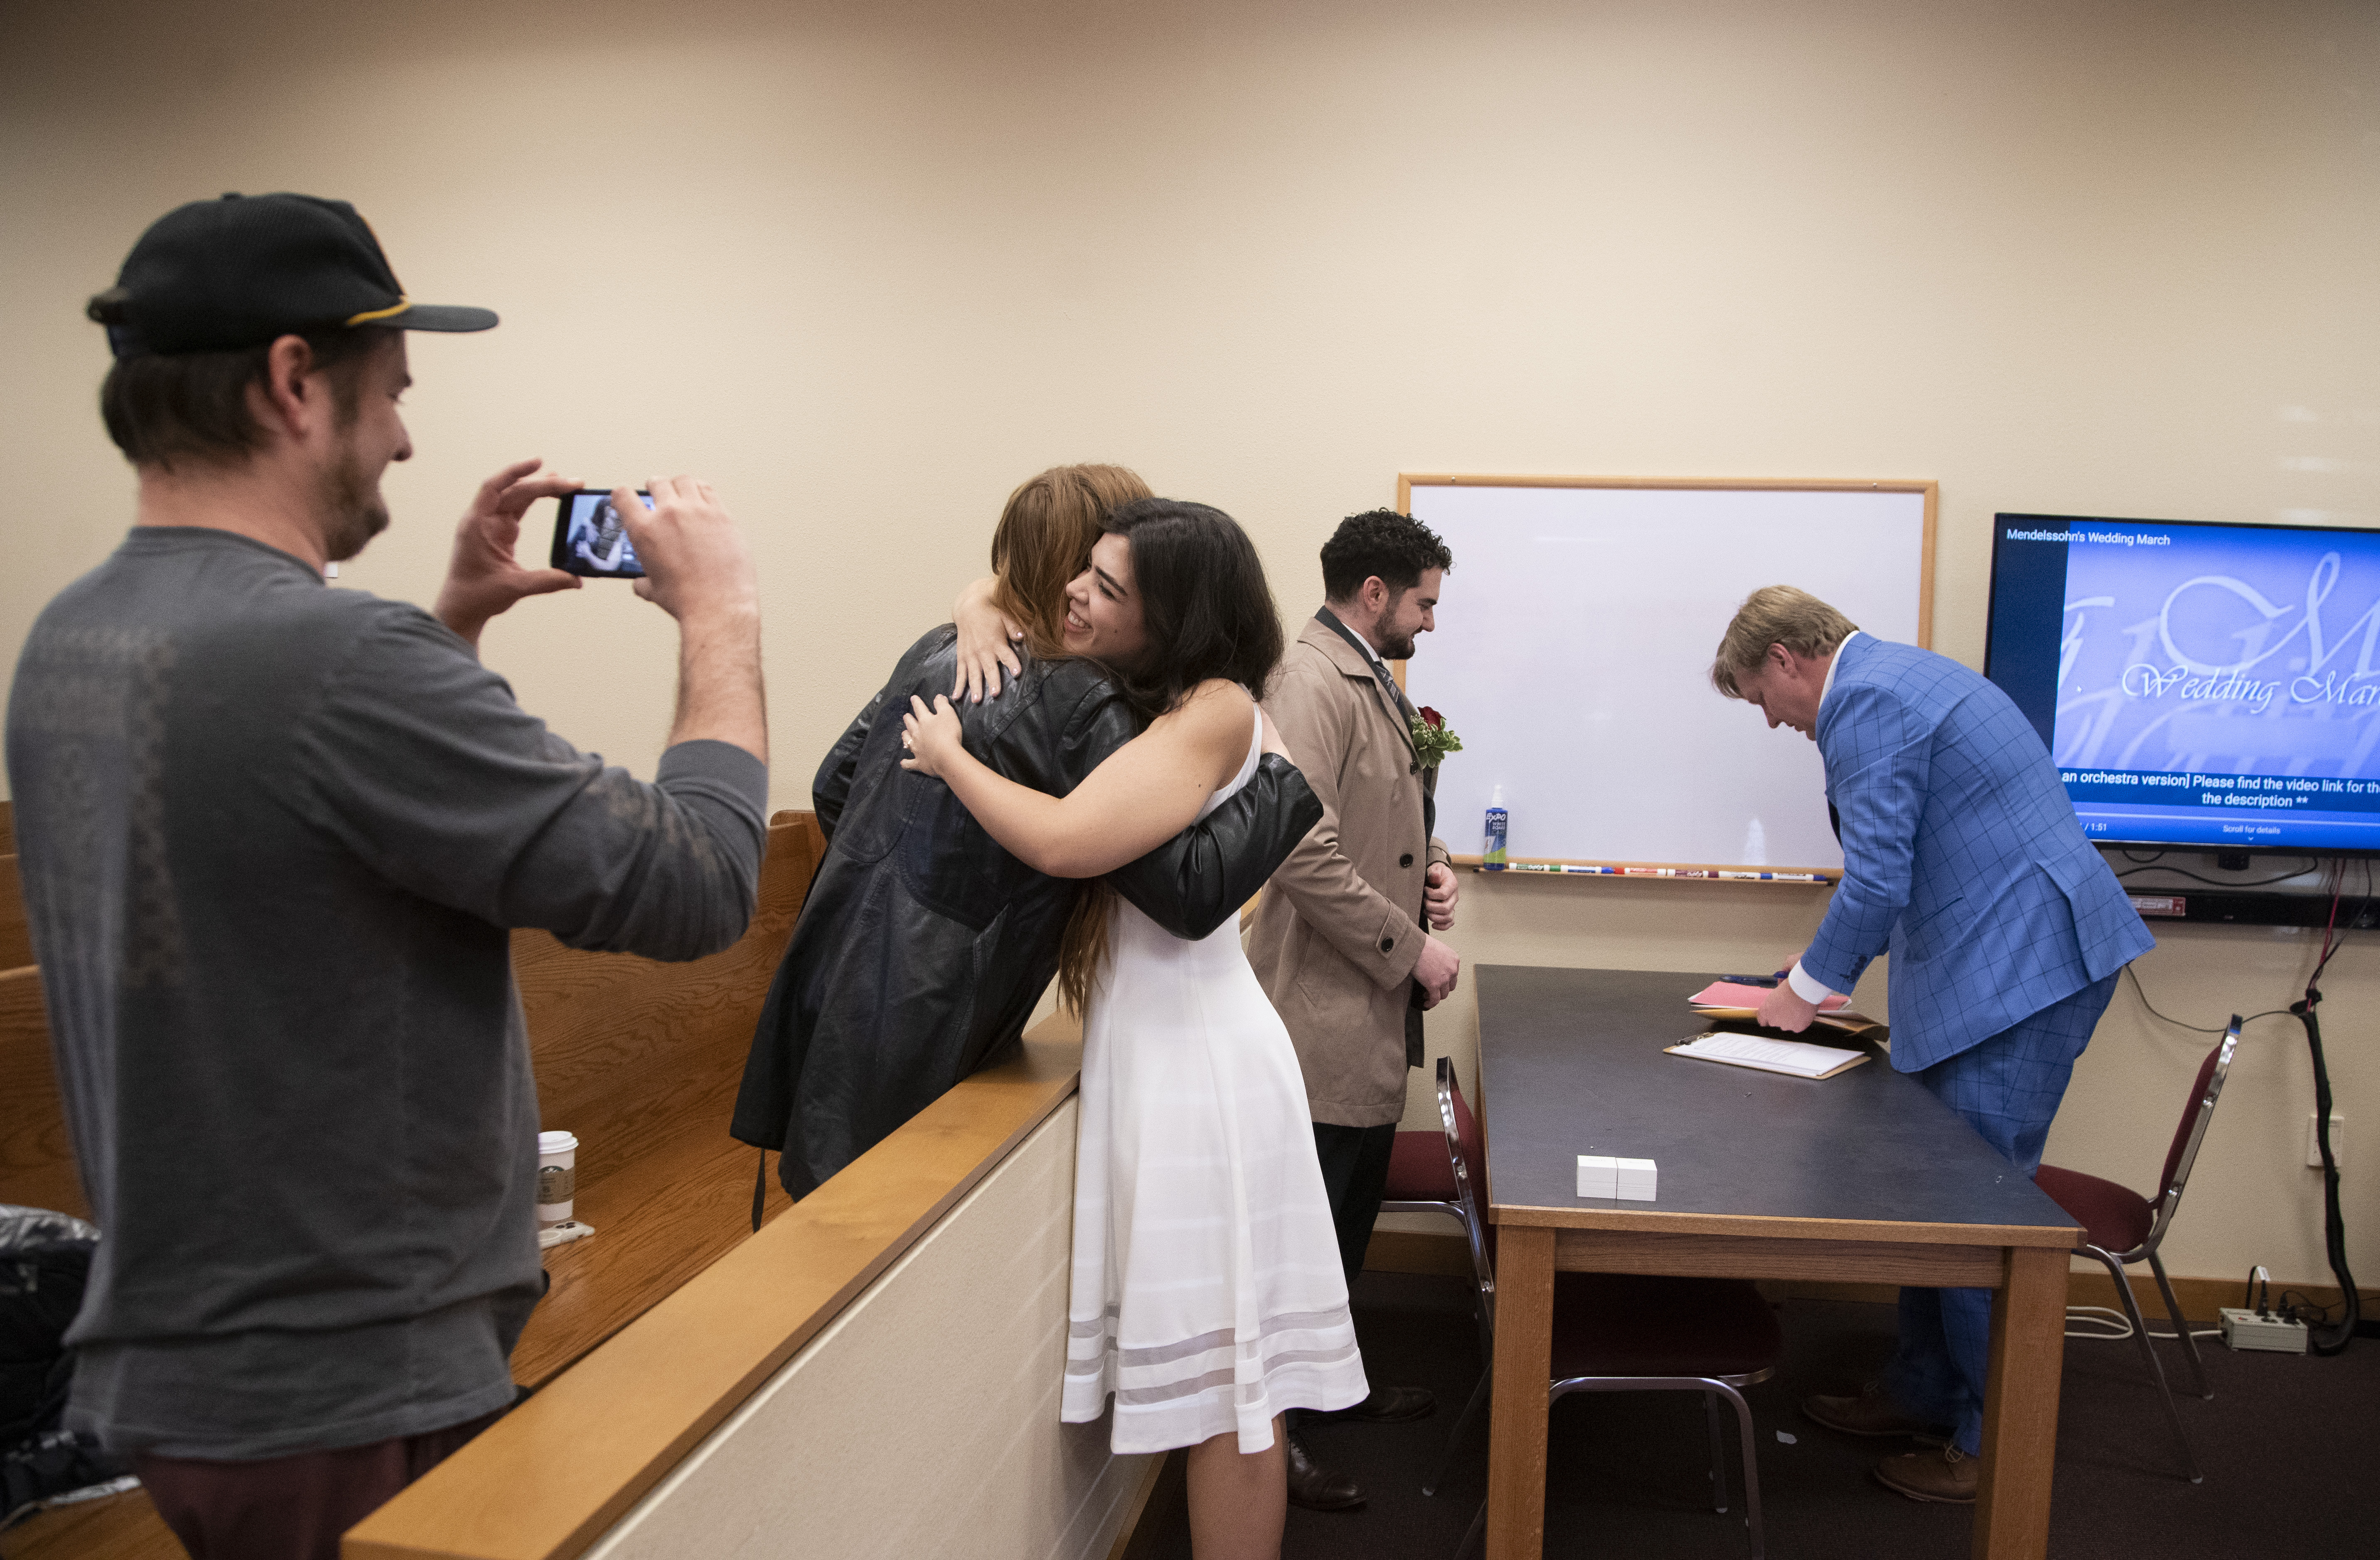 Wedding ceremonies were conducted throughout the day at the Marion County Justice Court in Salem, February 14, 2023. Beth Nakamura/The Oregonian